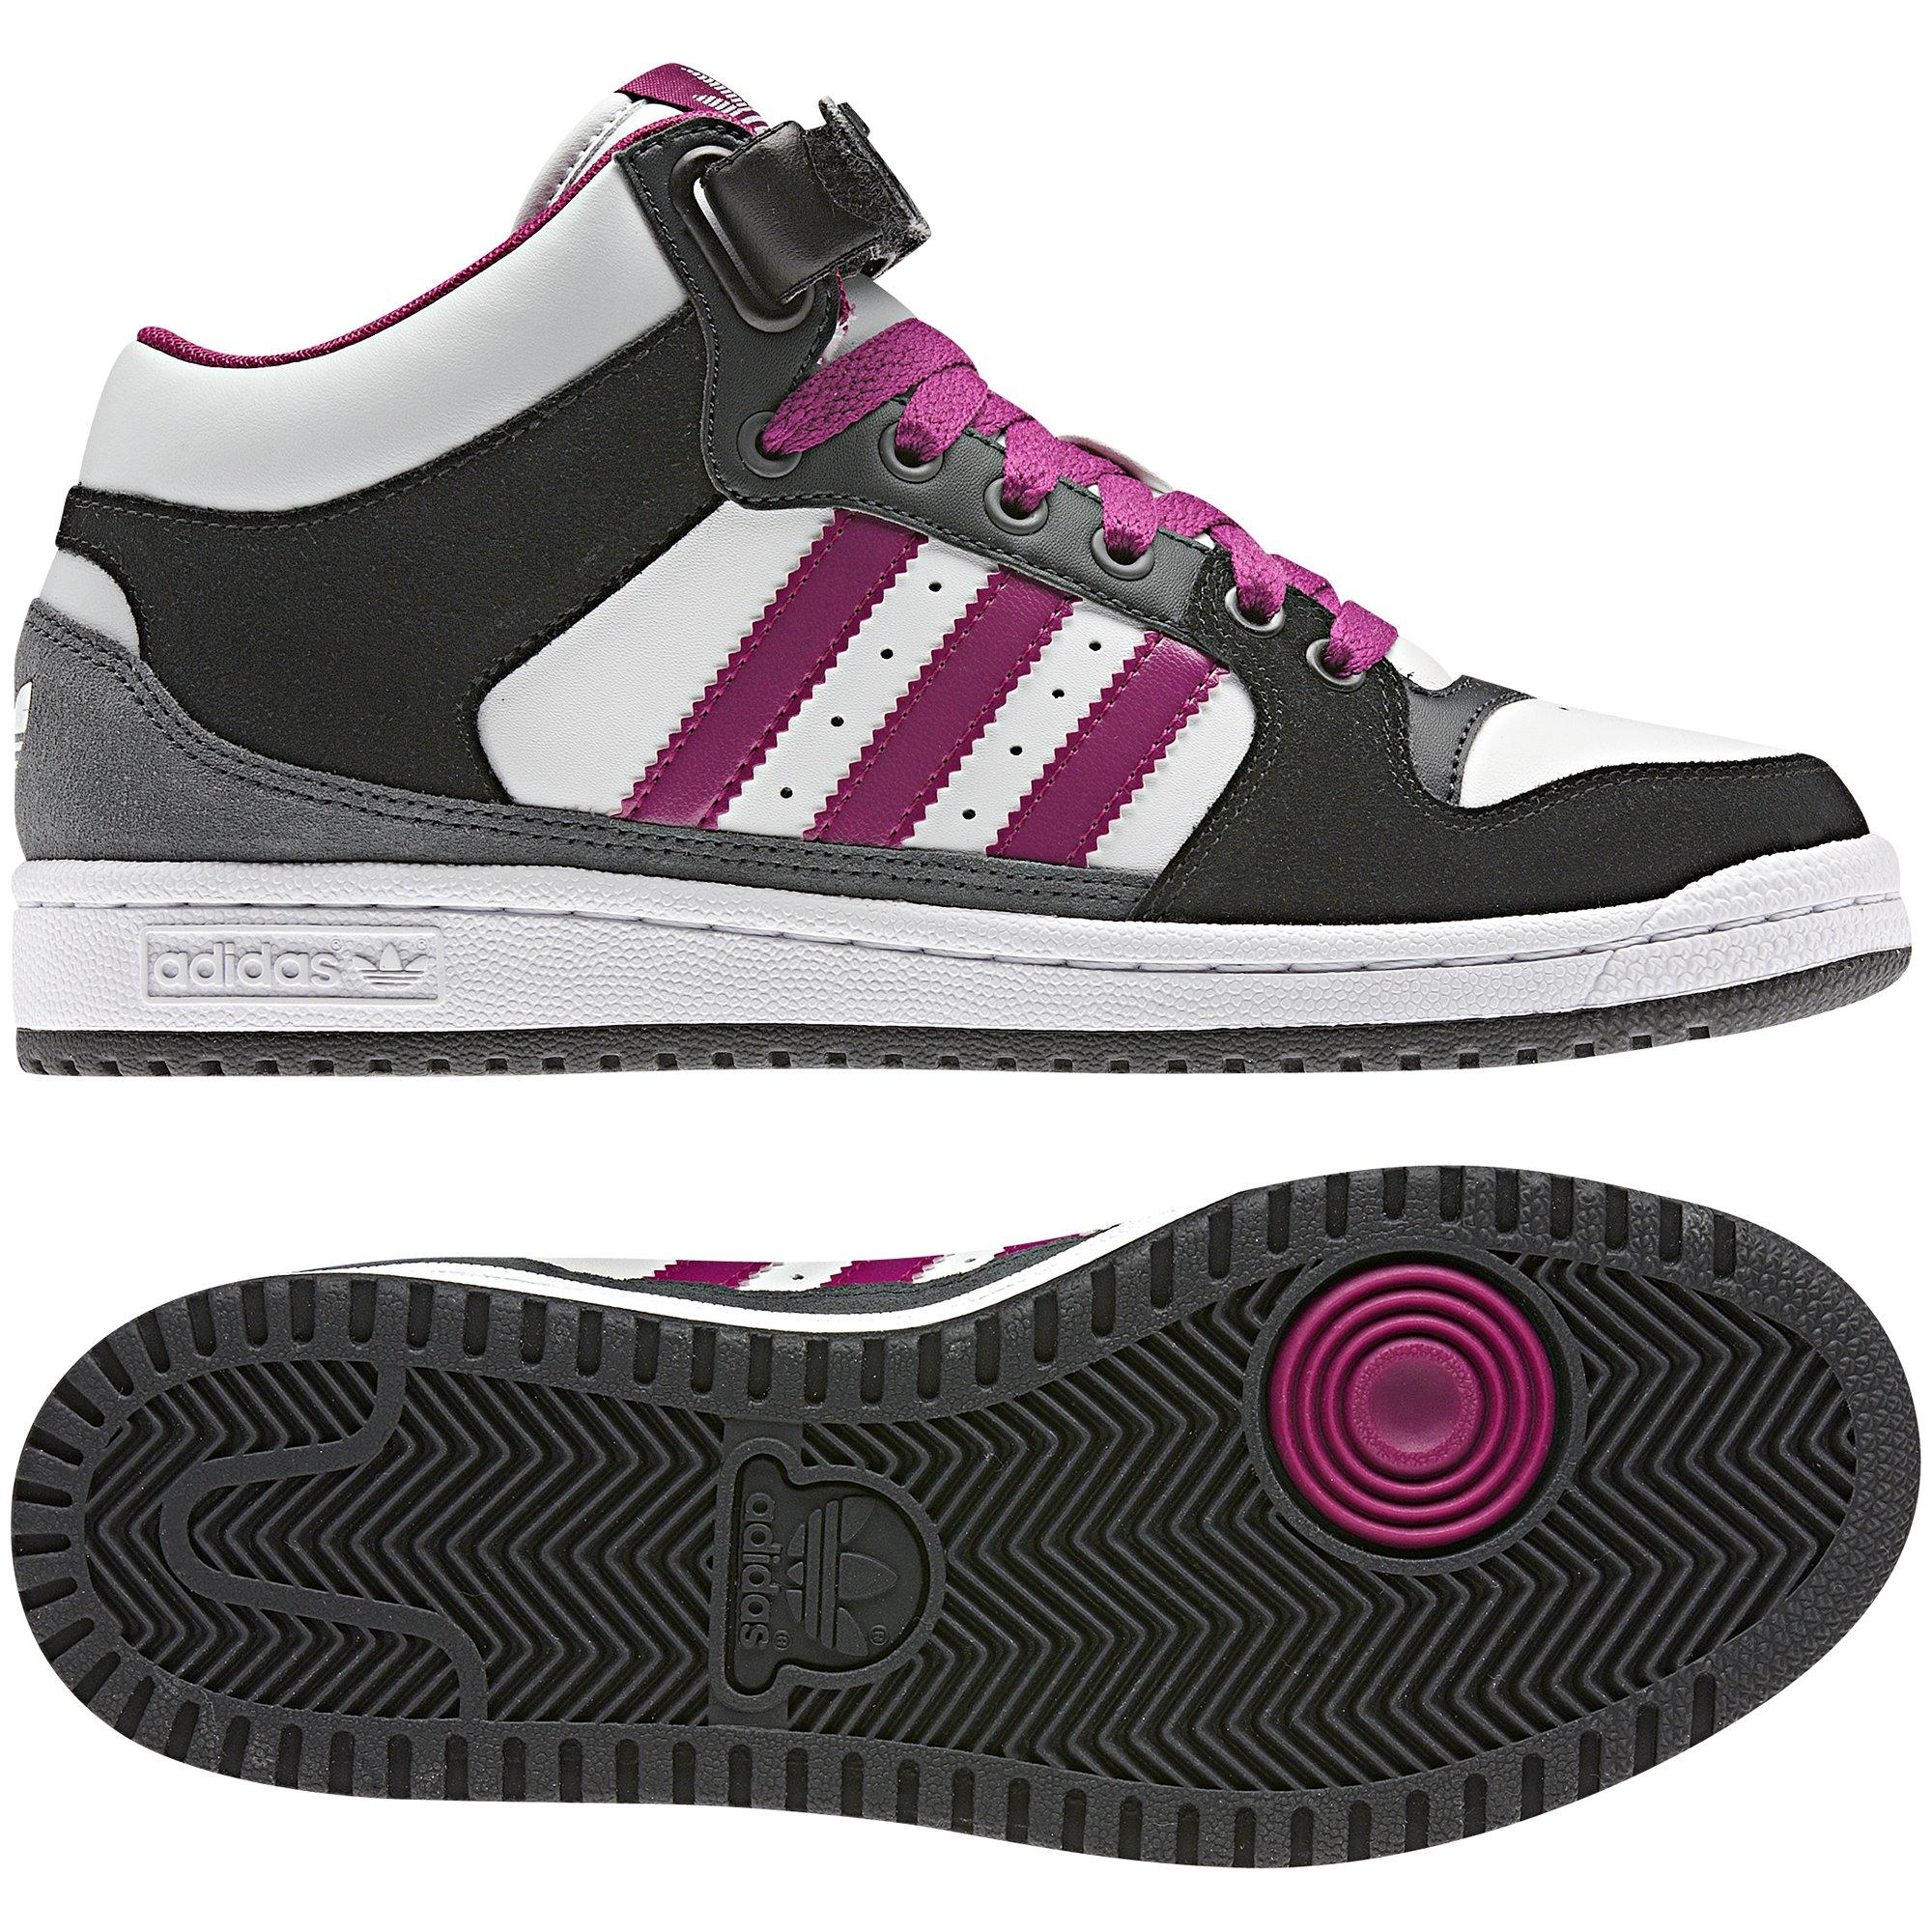 Foto adidas Decade Mid Shoes Mujer foto 1194